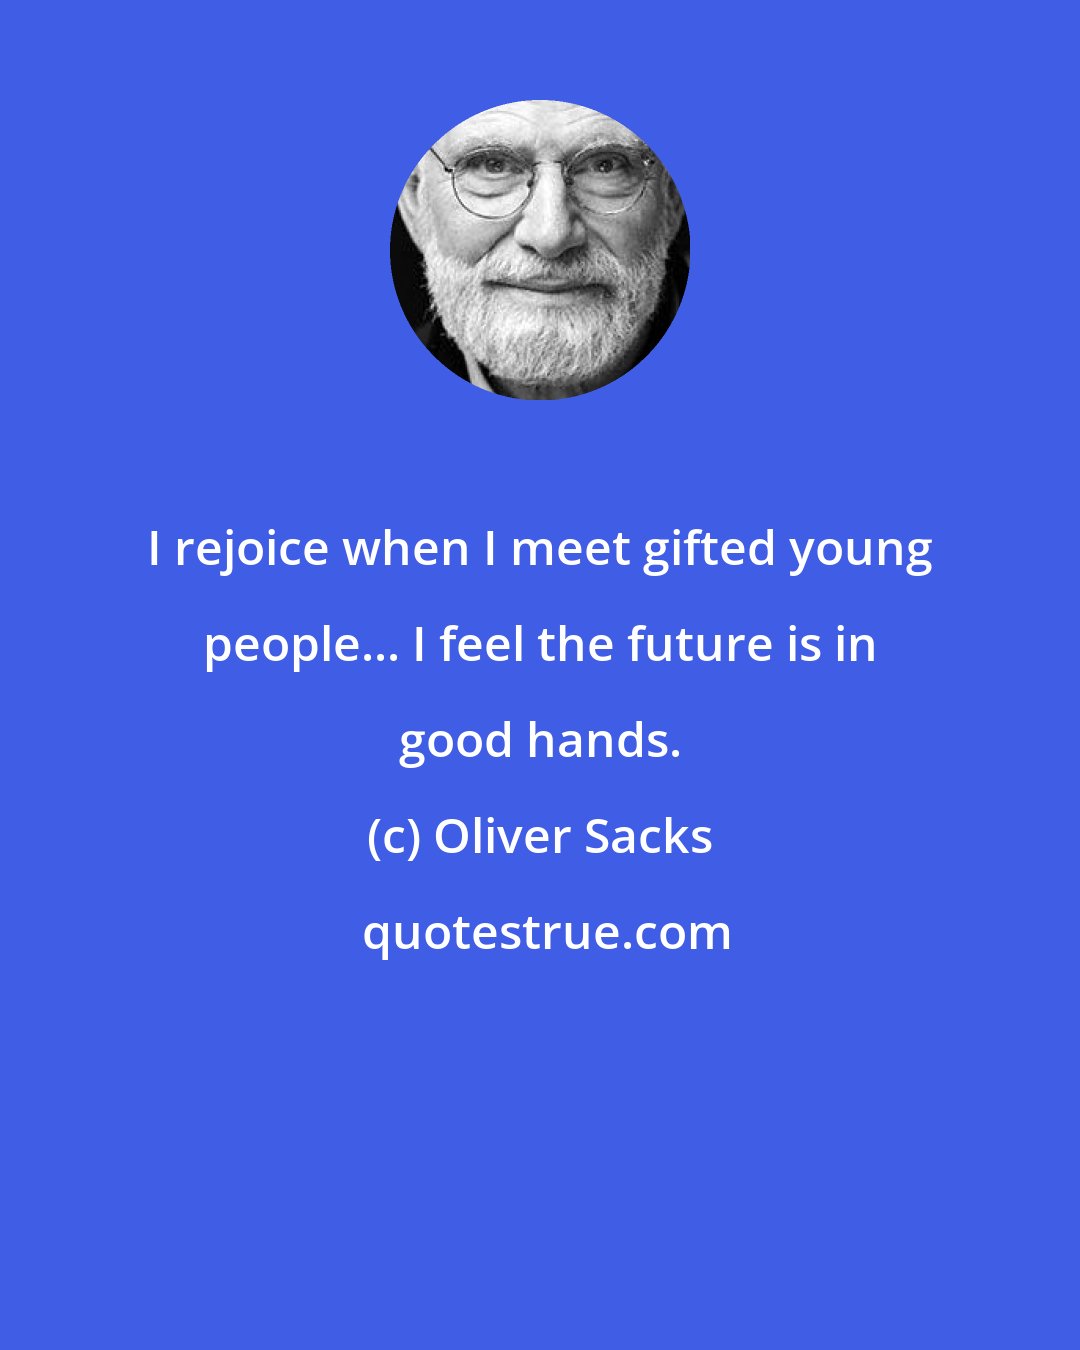 Oliver Sacks: I rejoice when I meet gifted young people... I feel the future is in good hands.